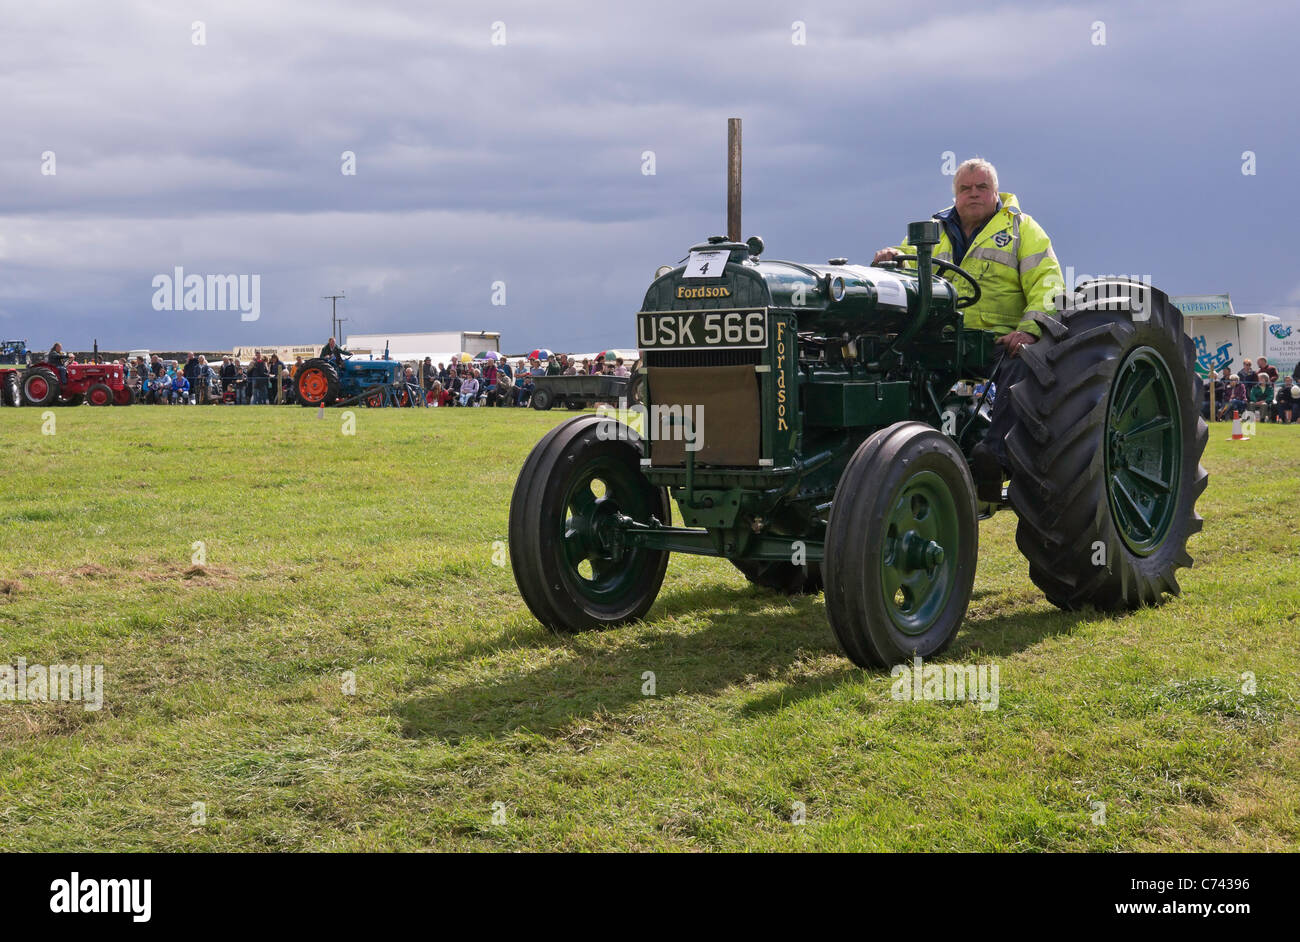 Fordson trattore nella parade ring a Wensleydale spettacolo agricolo, Leyburn, North Yorkshire. Foto Stock